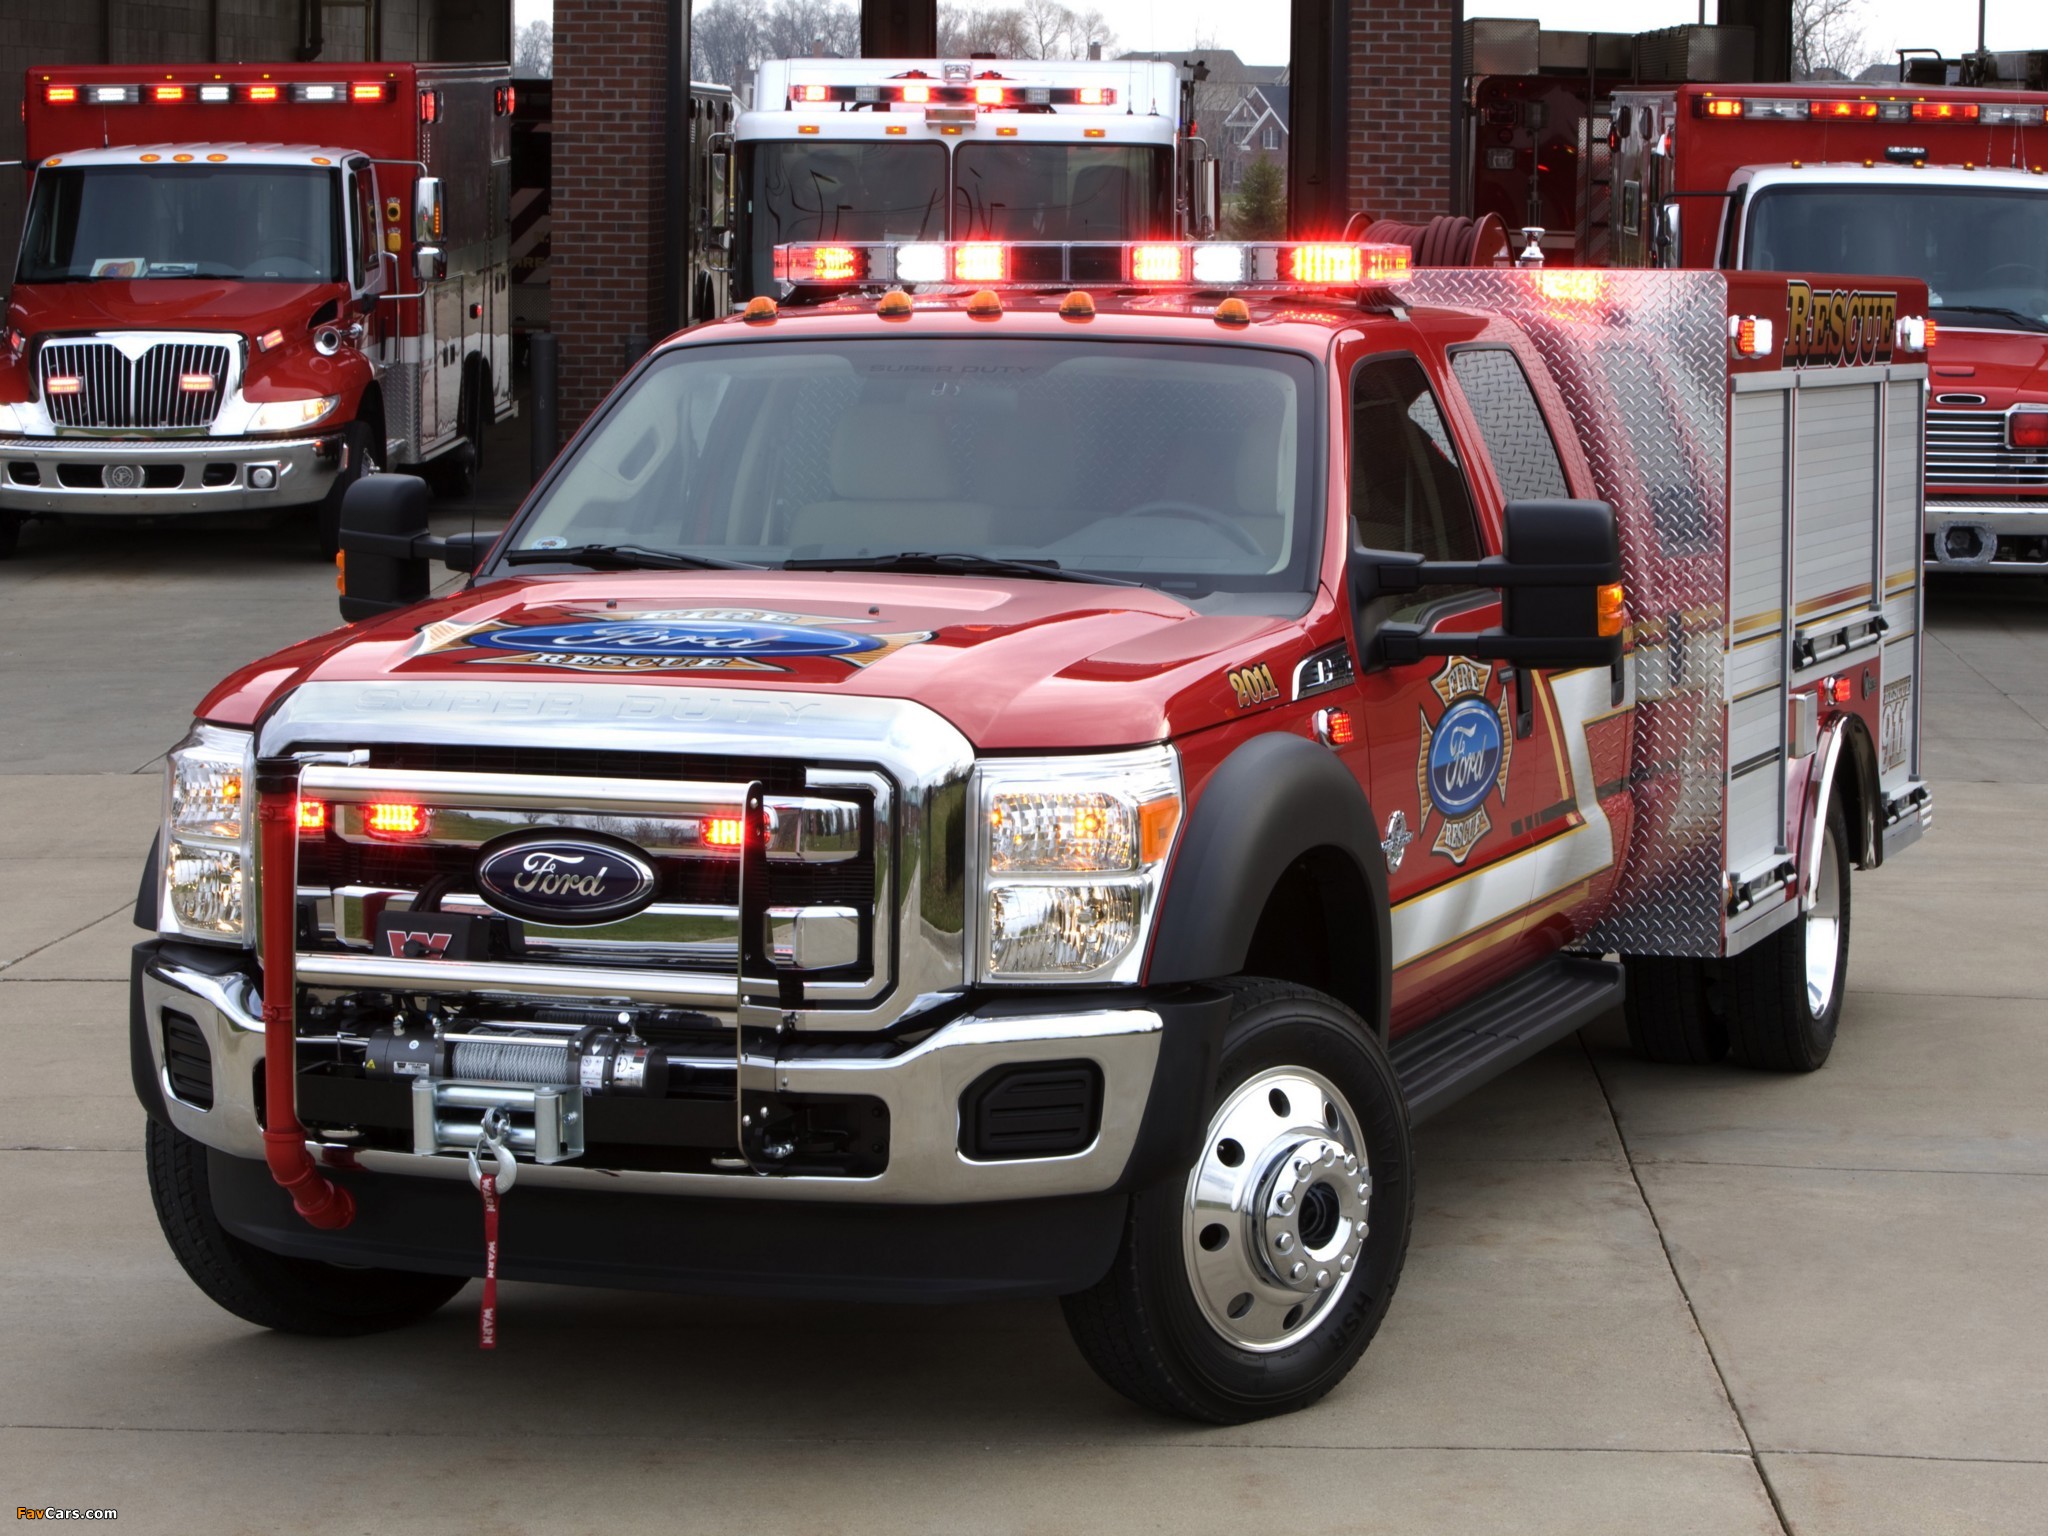 Ford F-550 Super Duty Crew Cab Firetruck by Warner 2010 images (2048 x 1536)